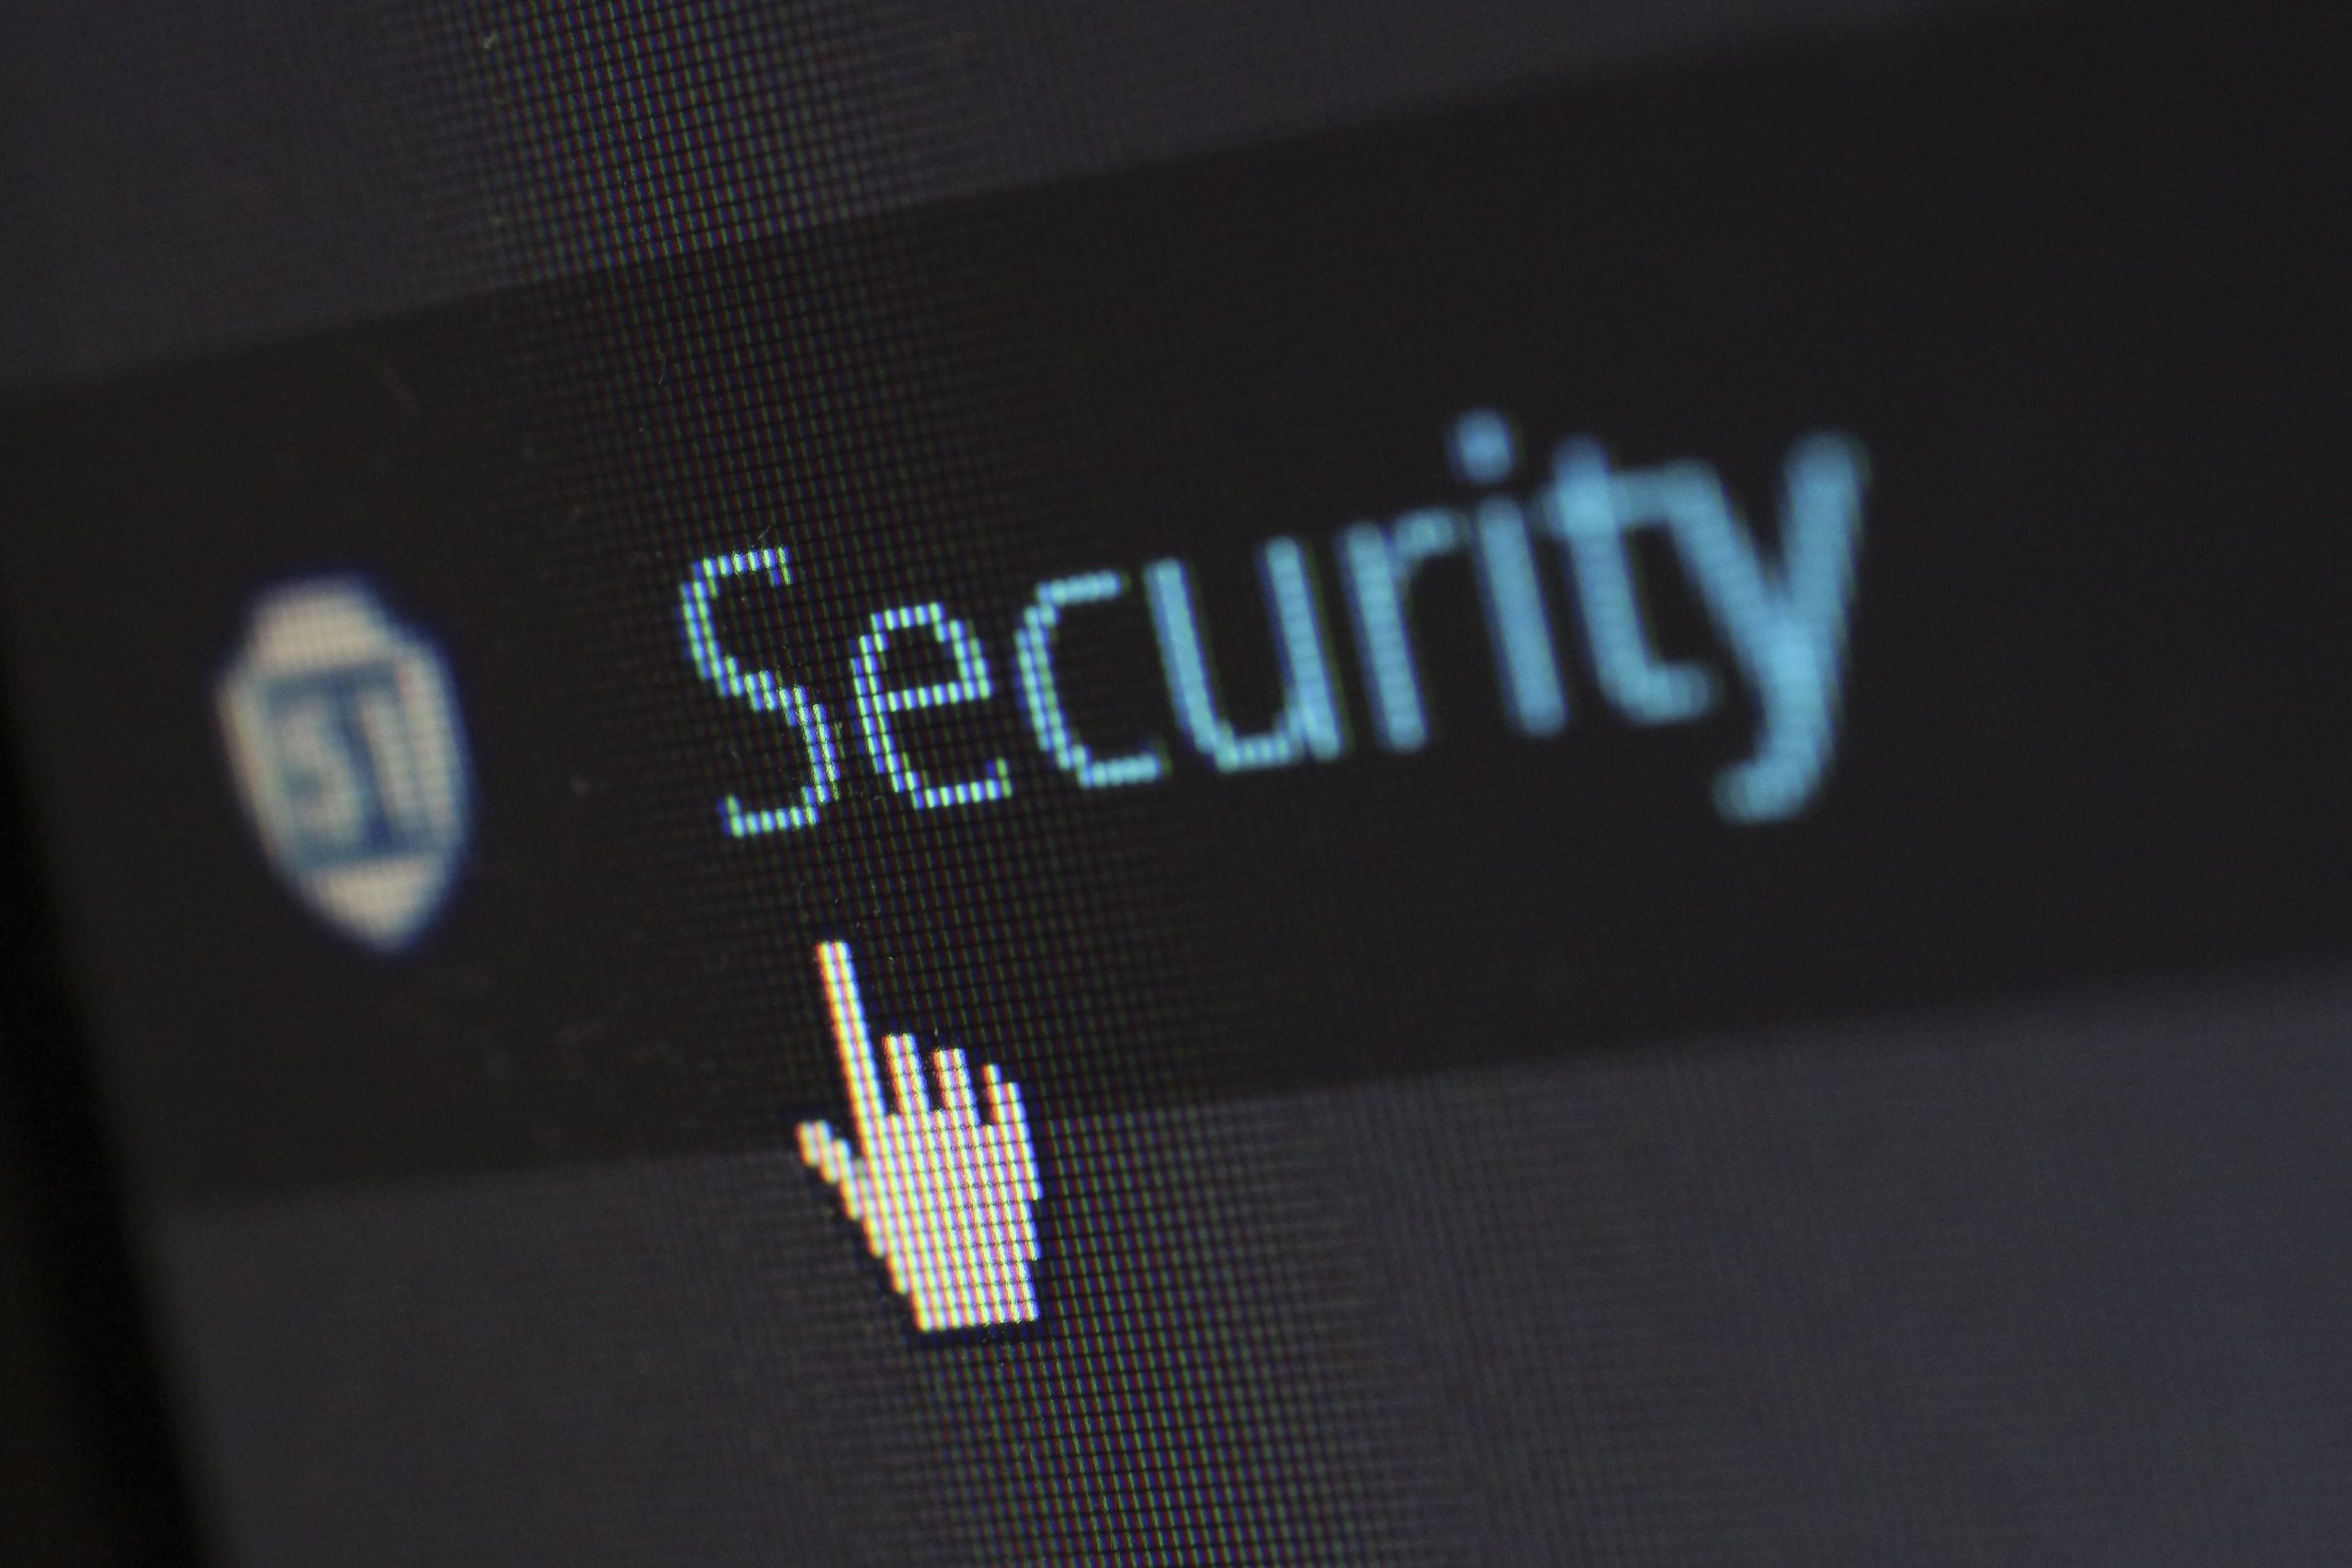 A photo of a computer screen. The cursor is pointing to the word "security"